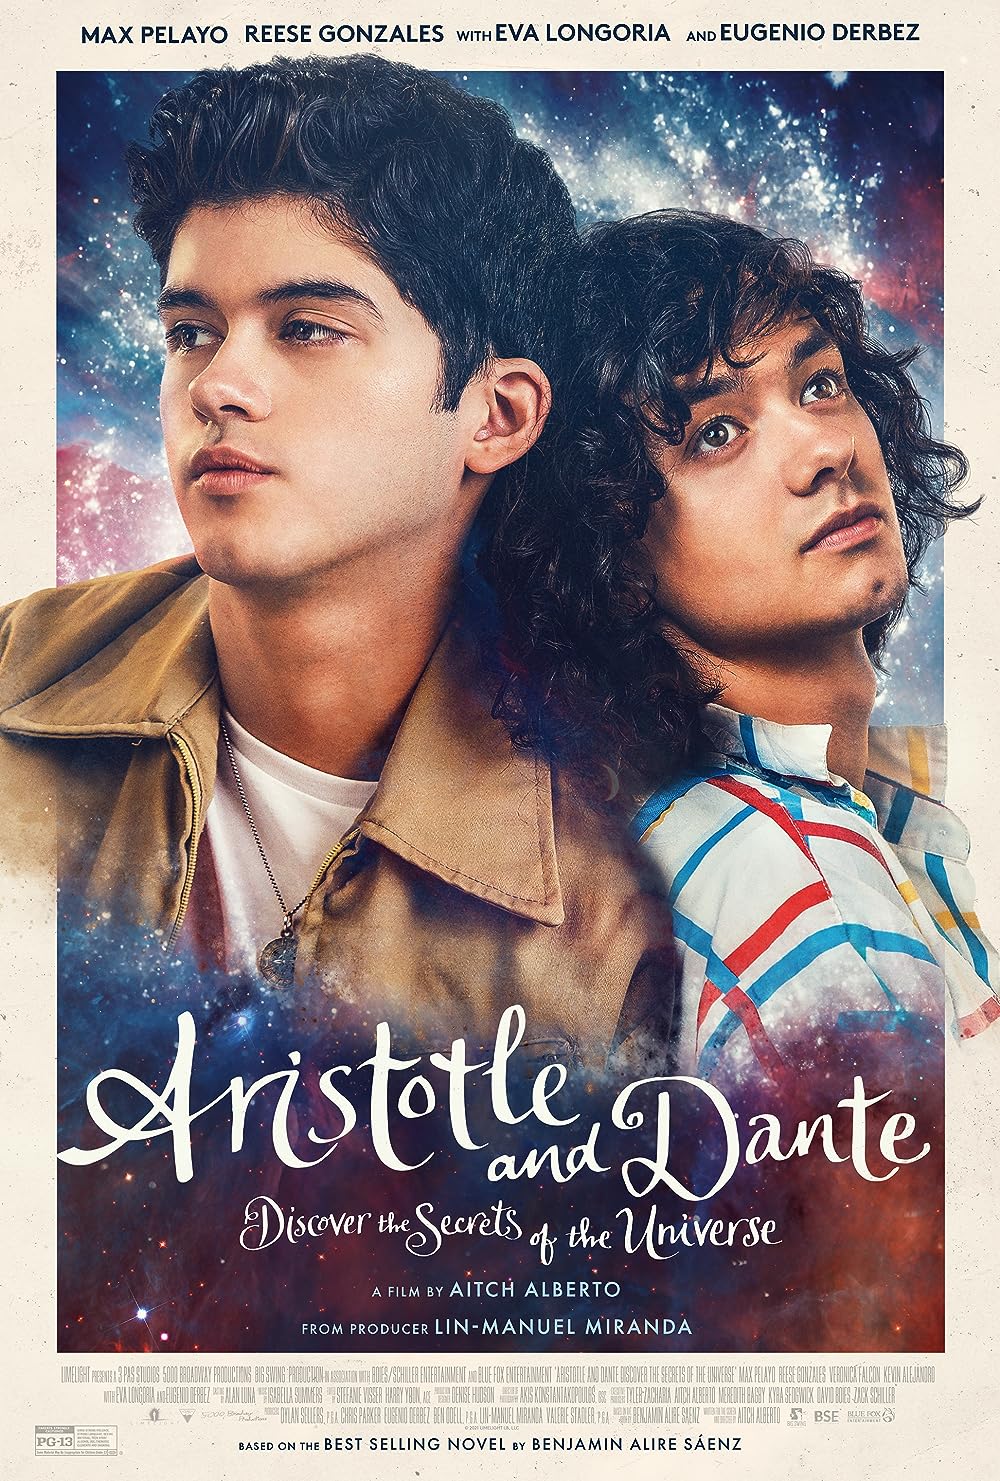 Movie Review: Aristotle and Dante Discover the Secrets of the Universe